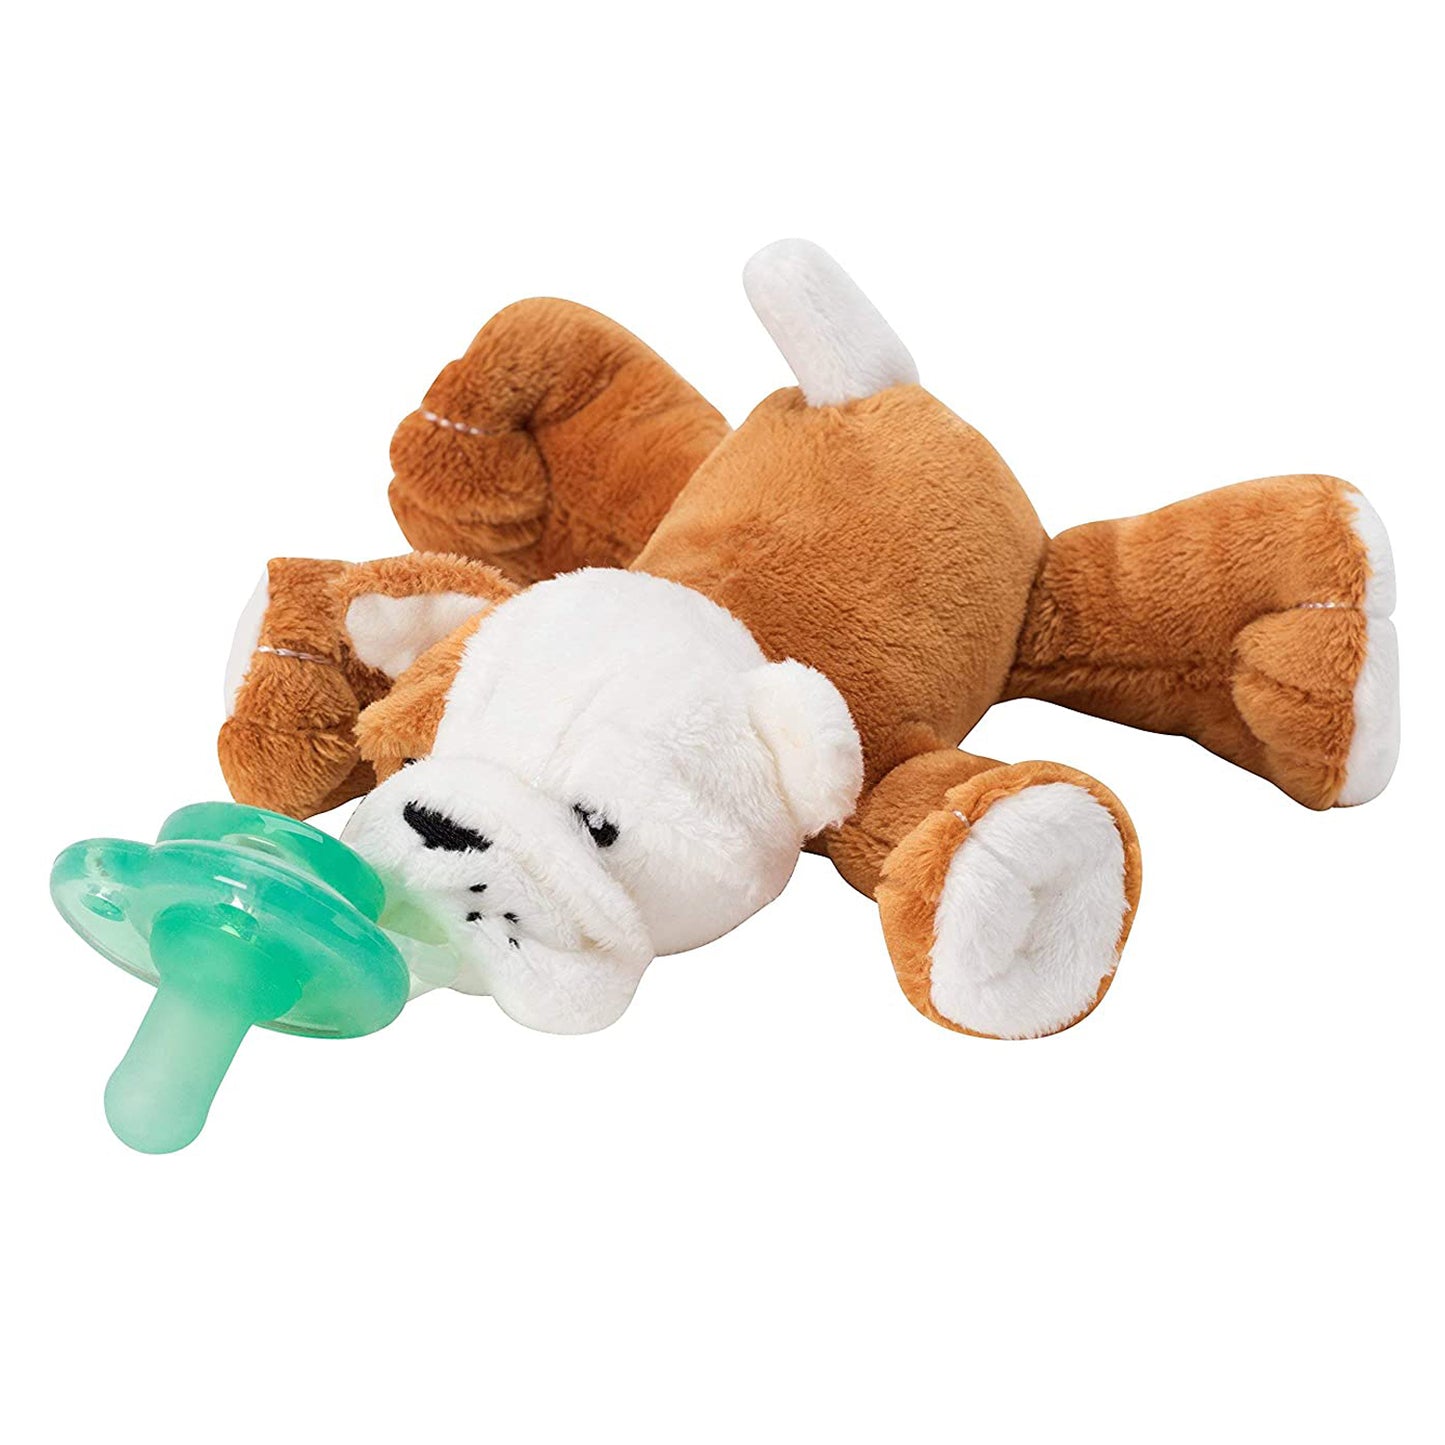 Pacifier Holder and Rattle - Barkley The Bull Dog